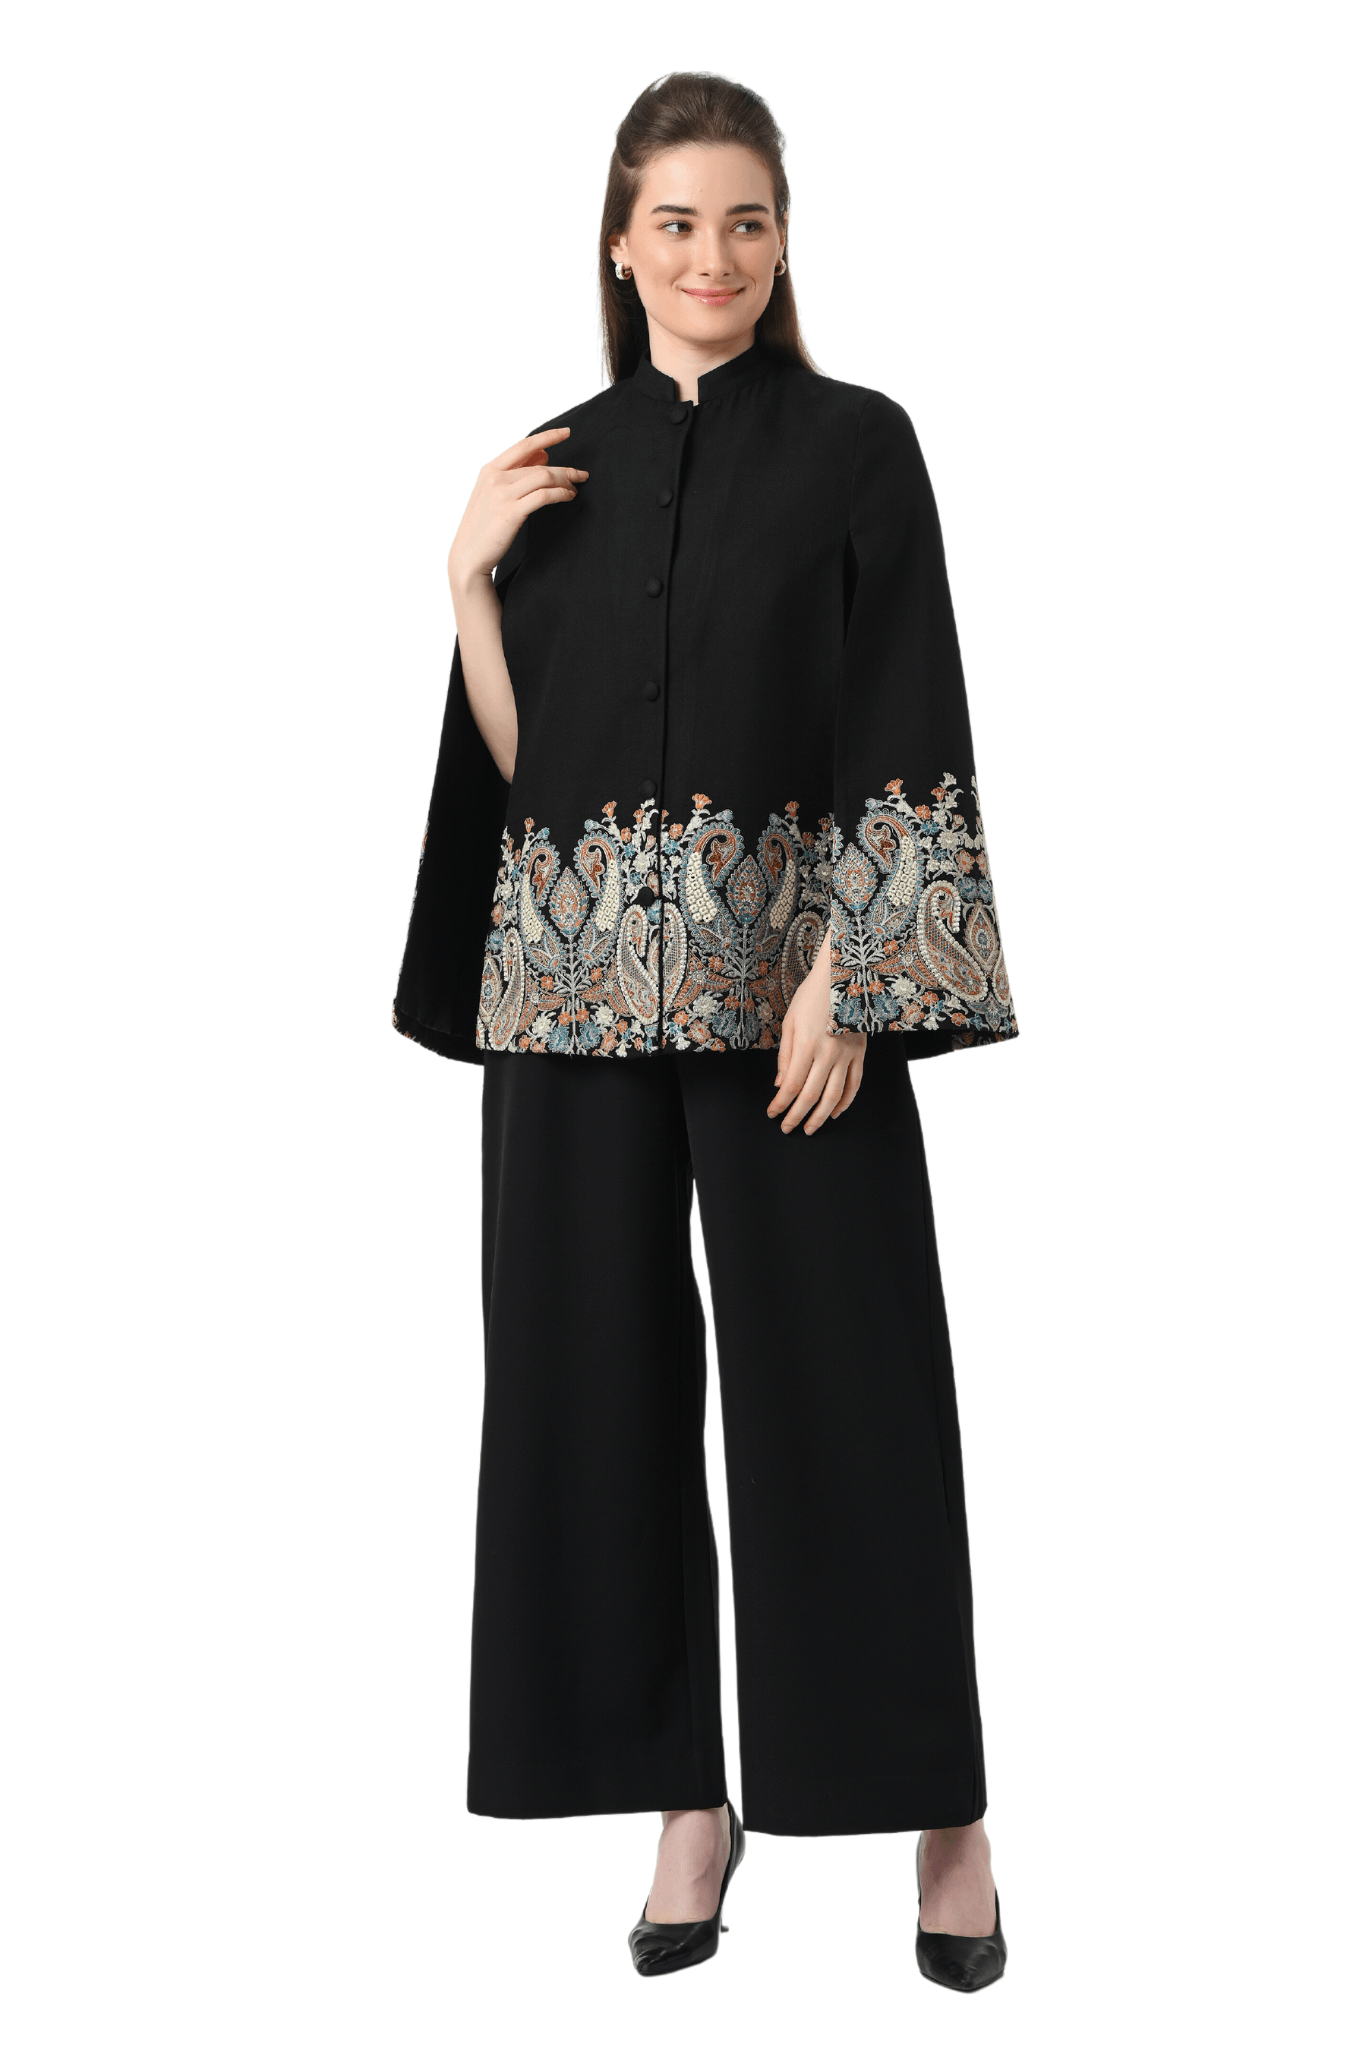 Majestic Paisley Embroidered Wool Cape